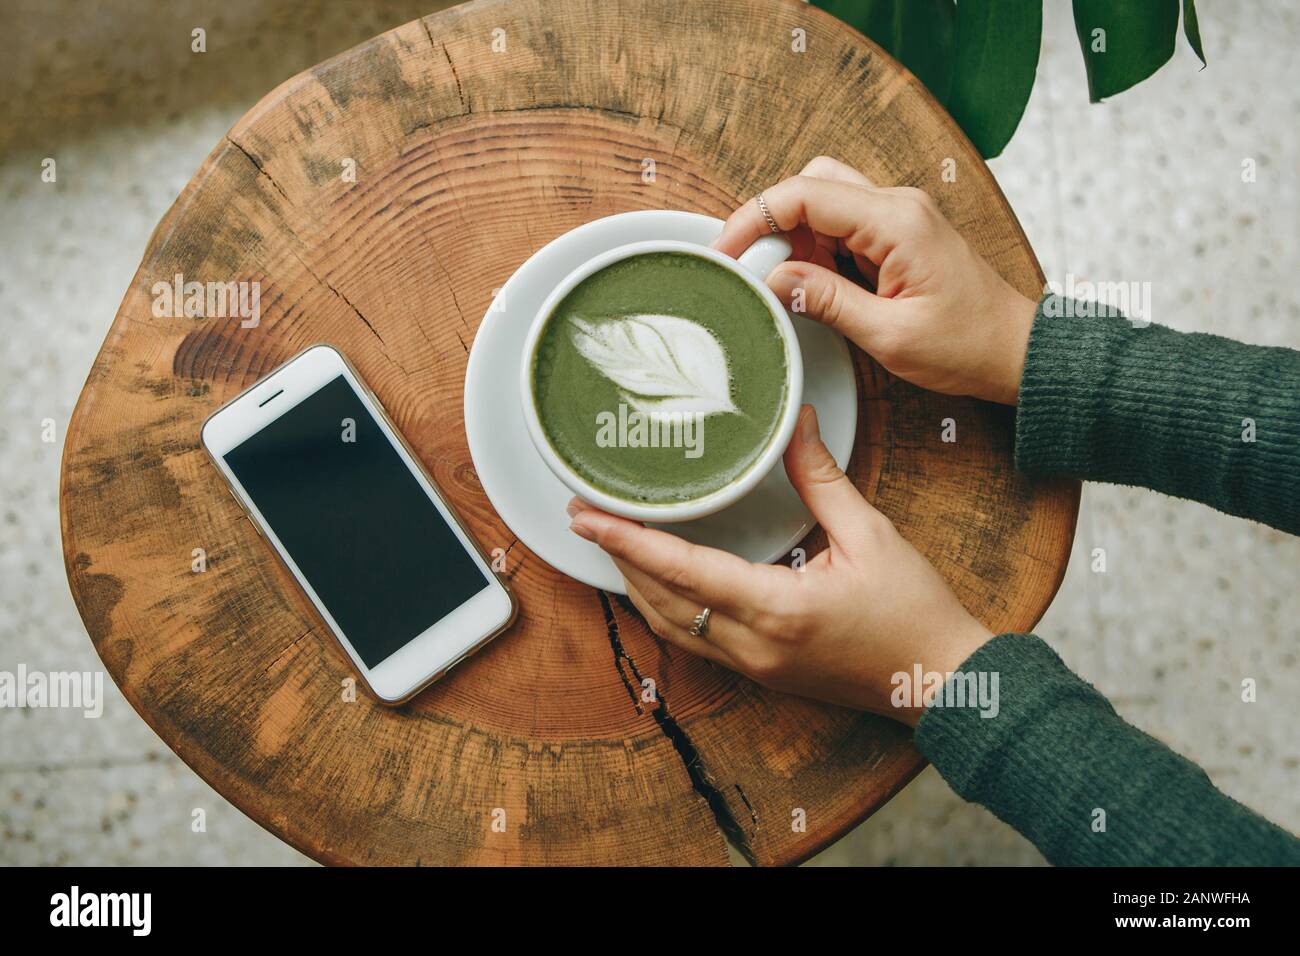 View from above. Girl holds in her hand a cup with fragrant fresh and healthy green matcha latte tea on a wooden table. Nearby lies a cell phone. Stock Photo